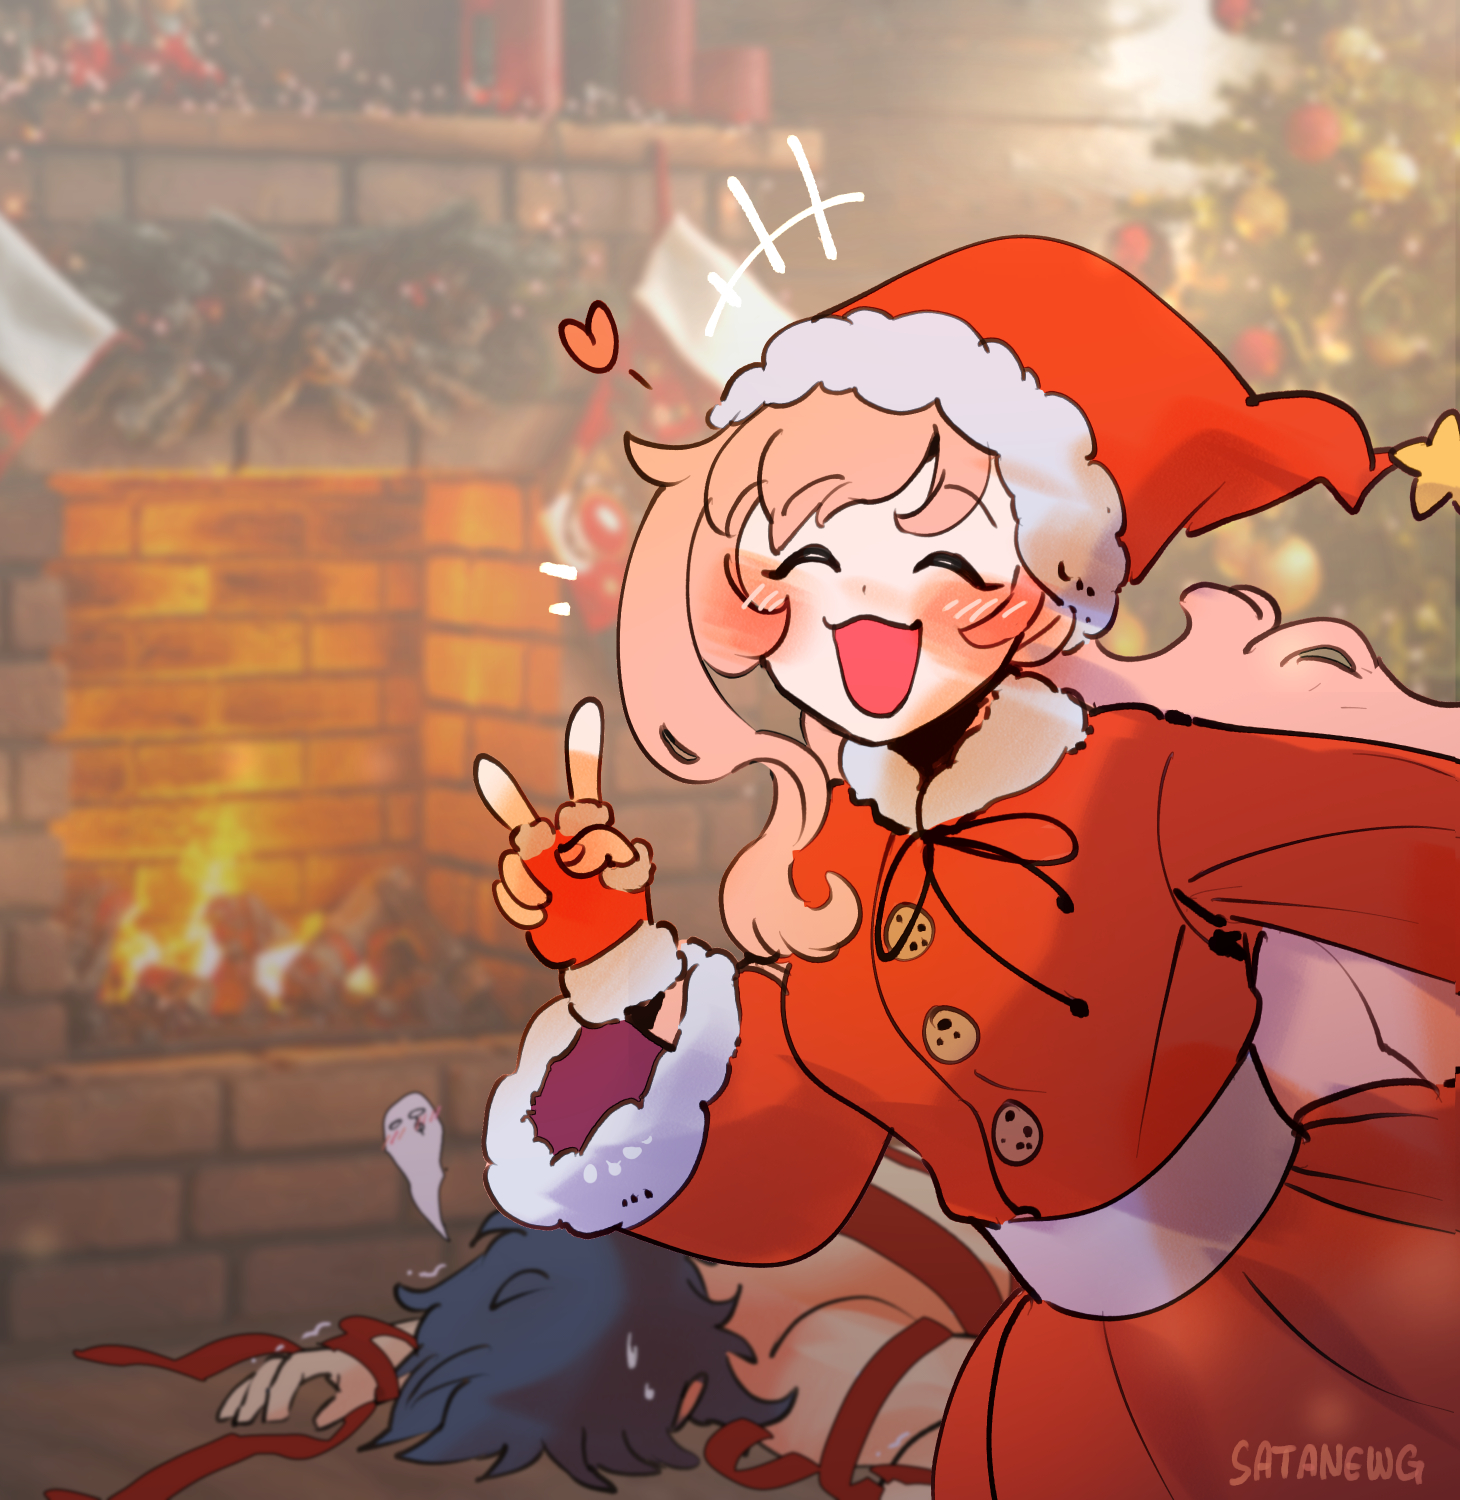 Its a little late but merry christmas